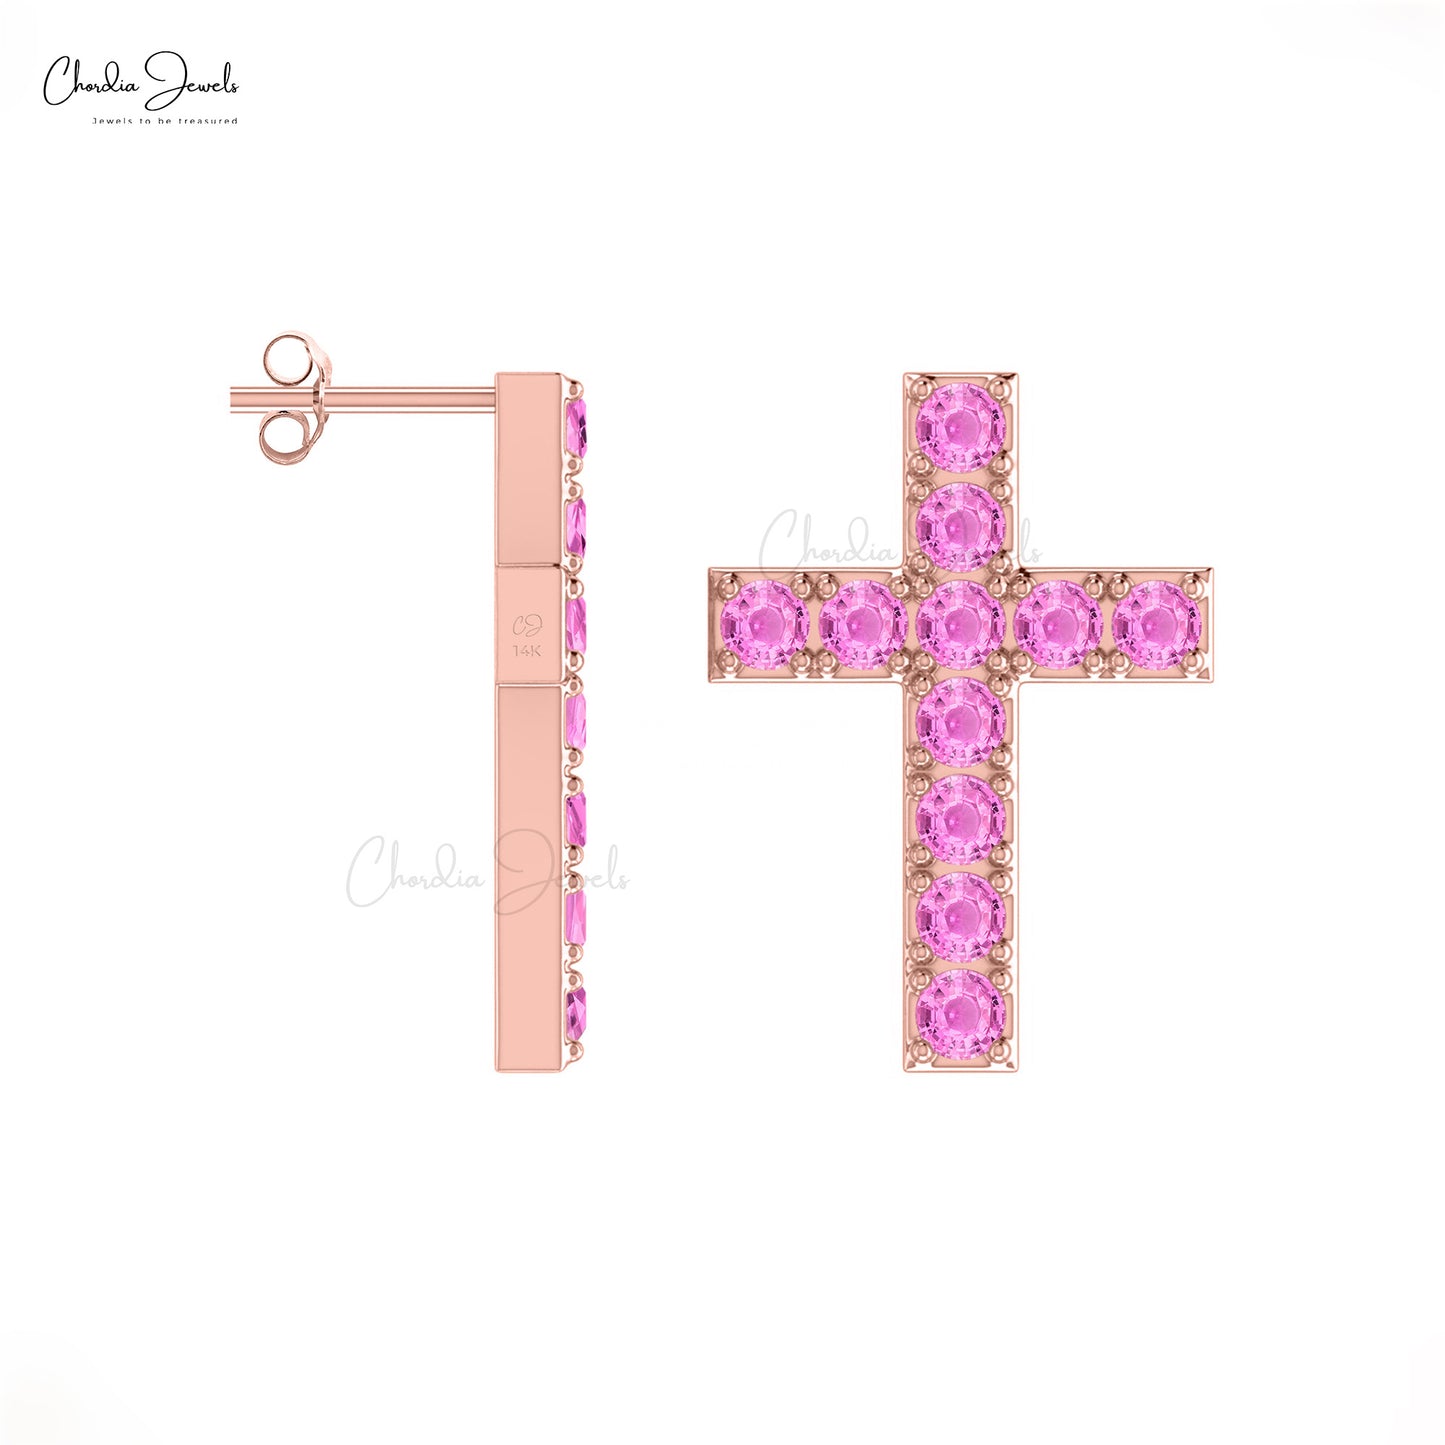 Charming and Fashionable 14k Solid Gold Classic Cross Natural Pink Sapphire Stud Earrings 2mm Round Gemstone Studs Valentine's Day Gift